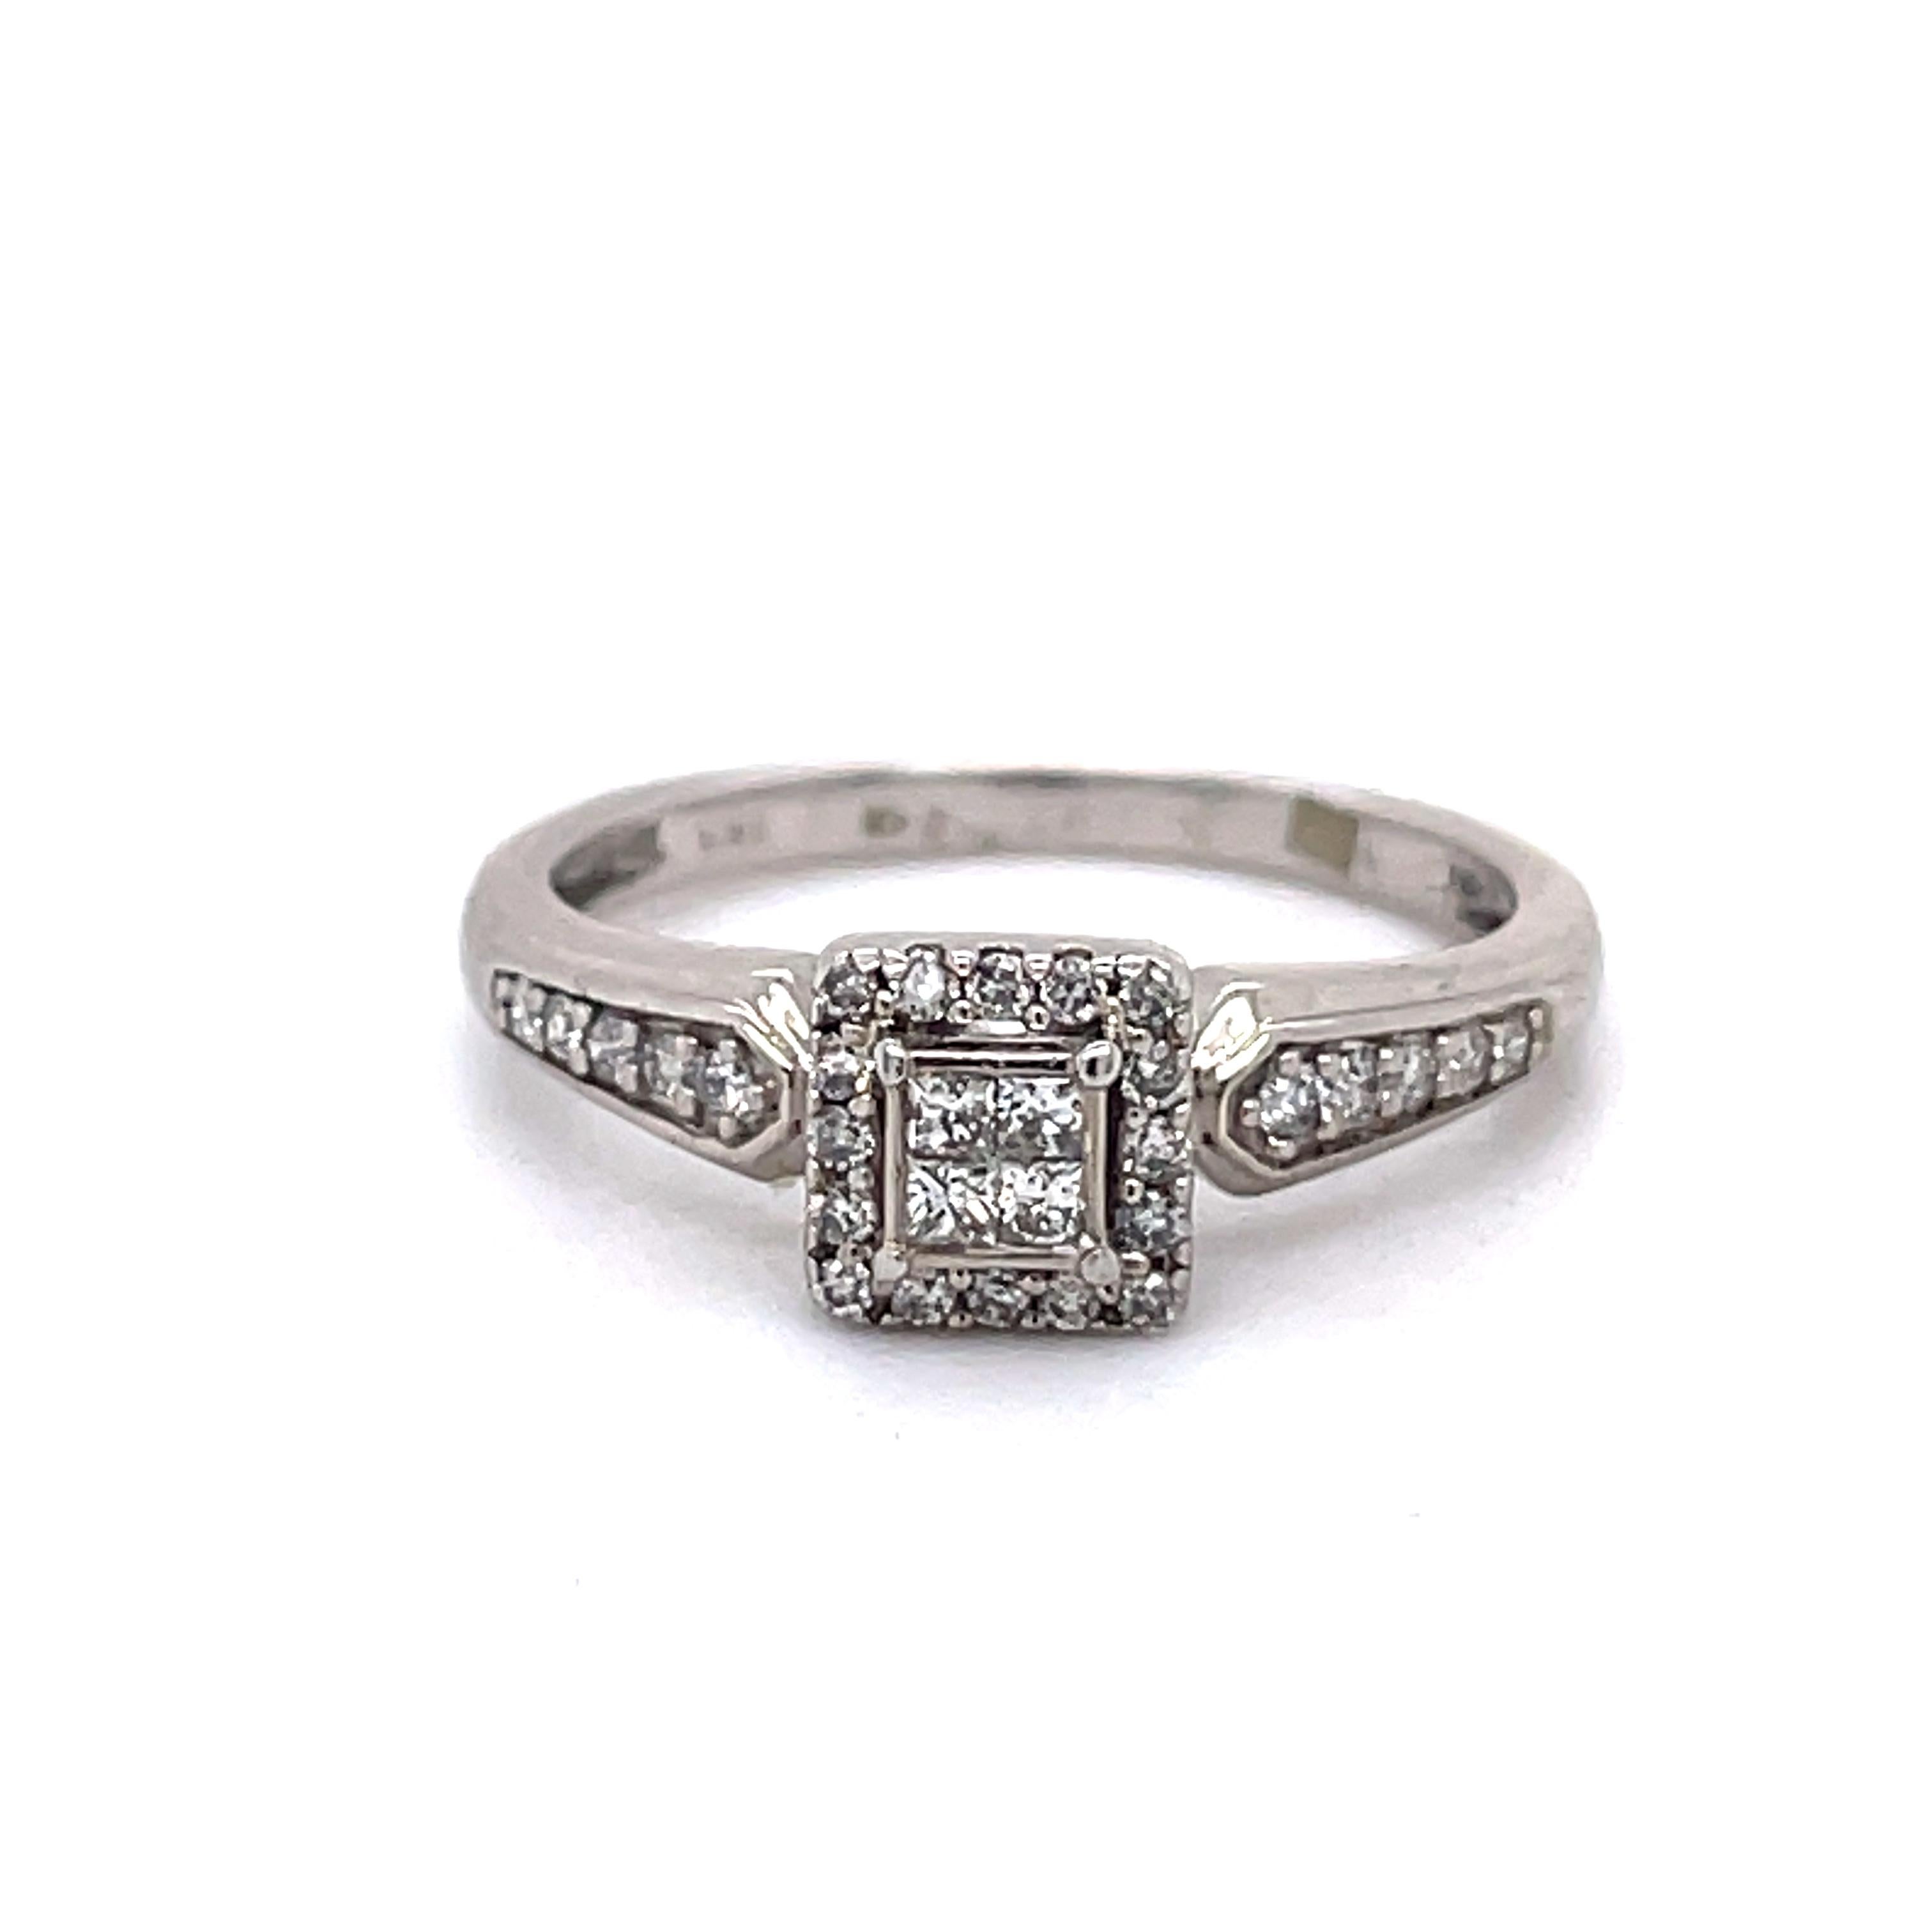 Vintage princess cut ring, dainty ring, 10K, 0.17ct diamonds, gold promise ring For Sale 3